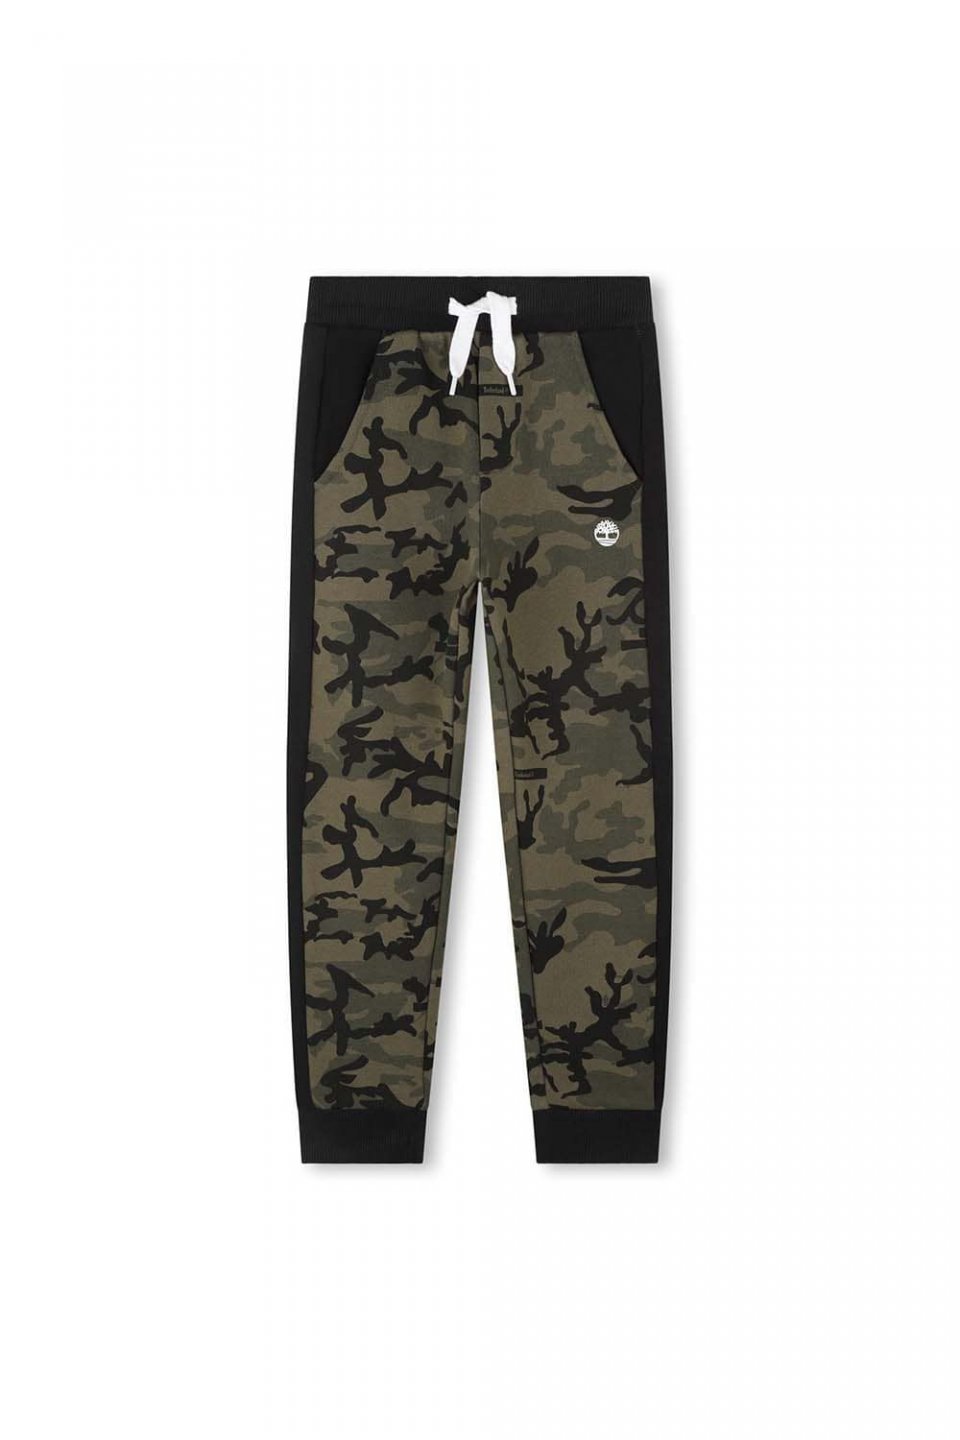 TIMBERLAND BOYS CLOTHING   T24C39 CAMO/BLACK JOGGER BOTTOMS 4yrs only 